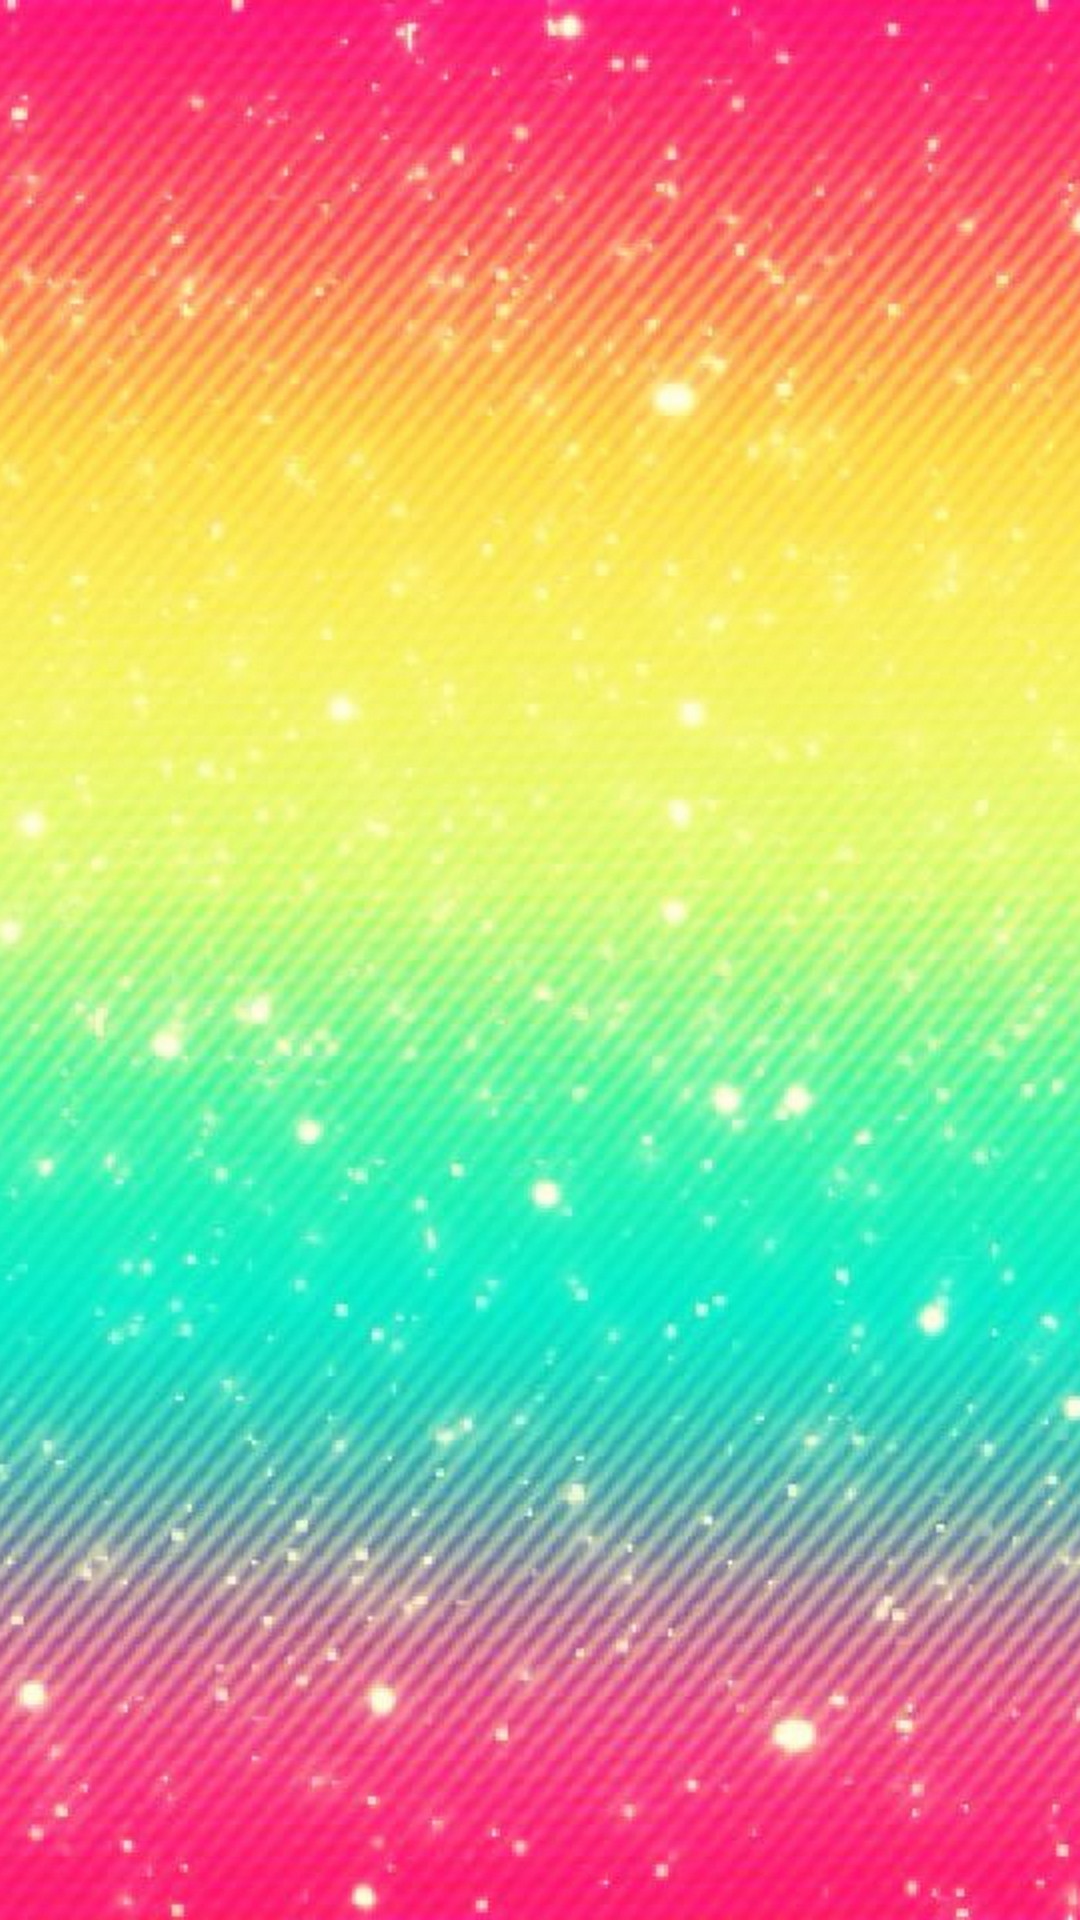 Rainbow Wallpaper Cute Girly For Android